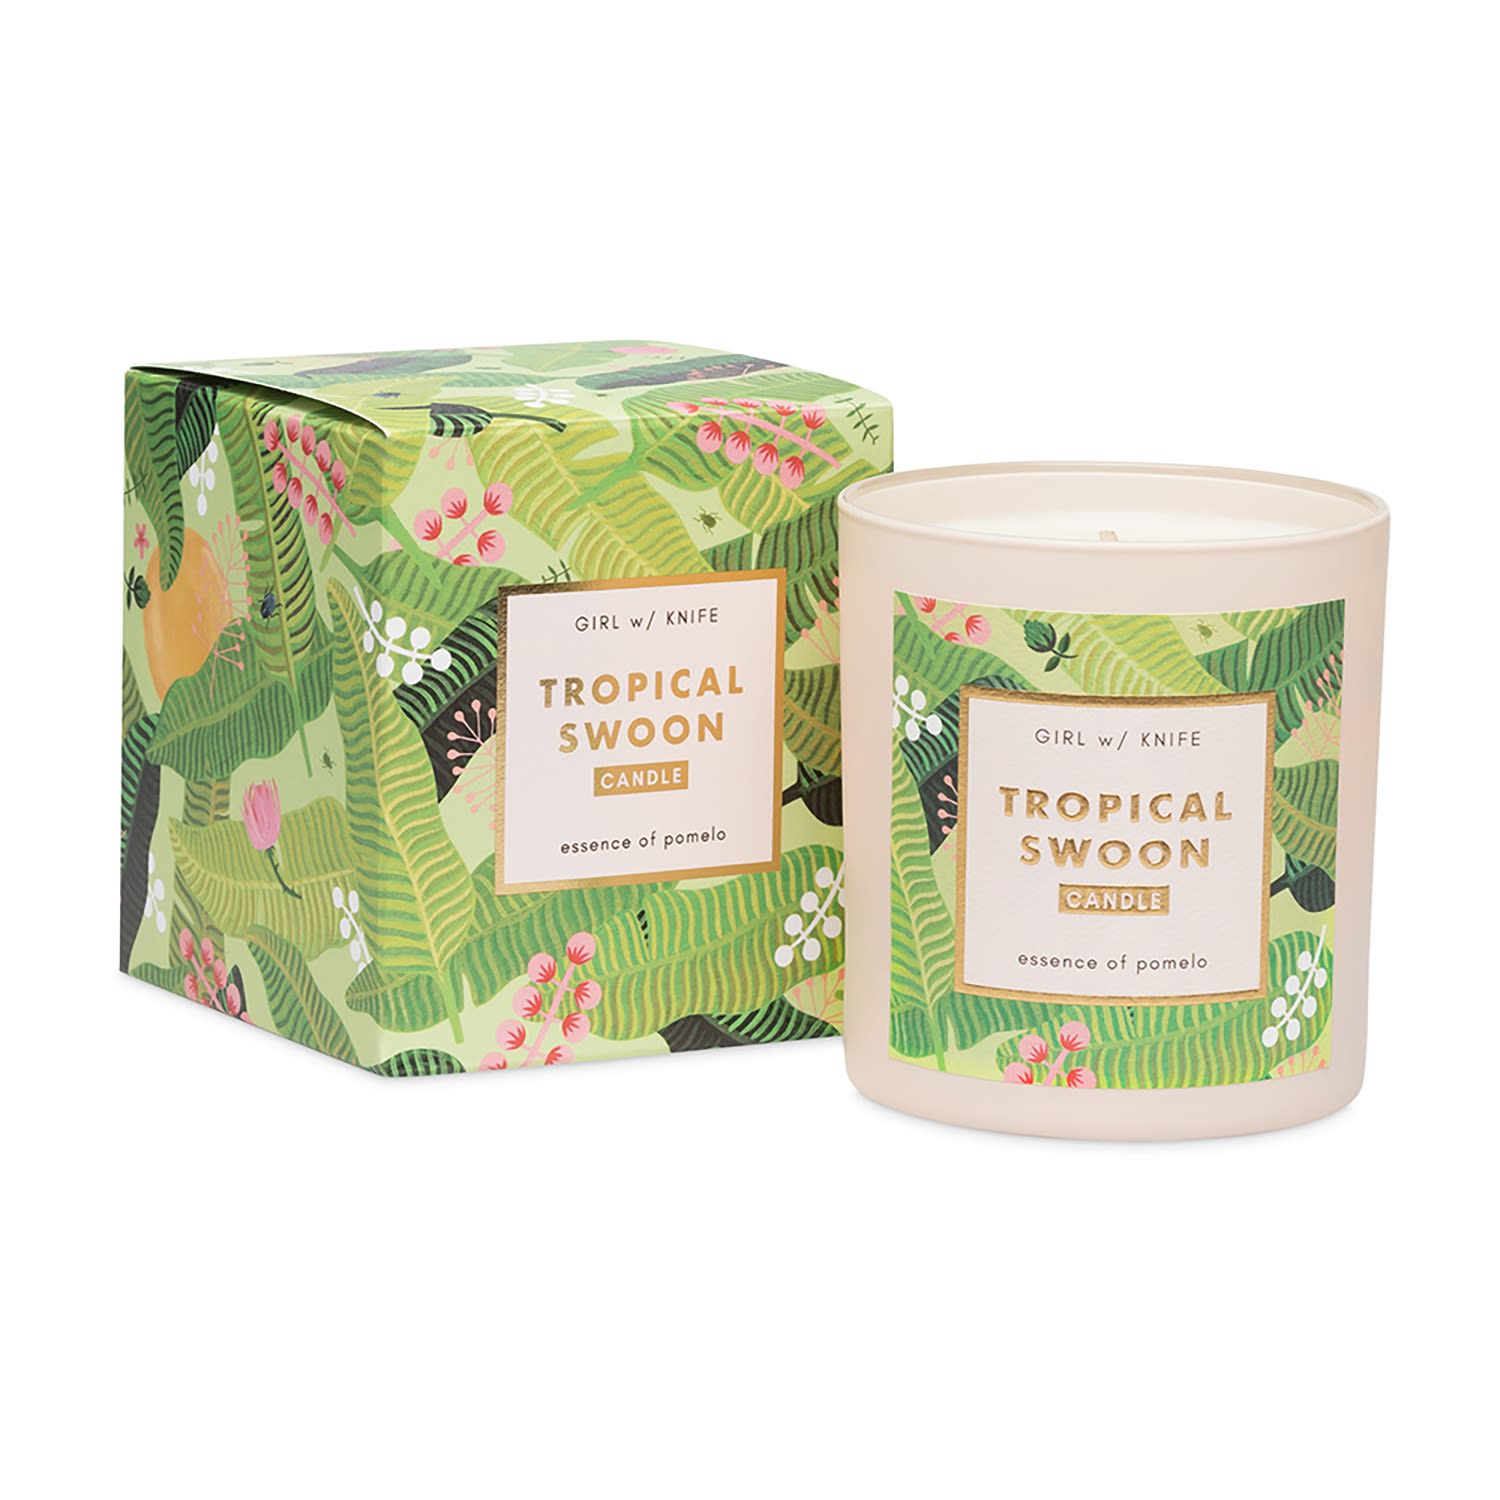 Tropical Swoon Candle - Essence Of Pomelo Girl W/ Knife